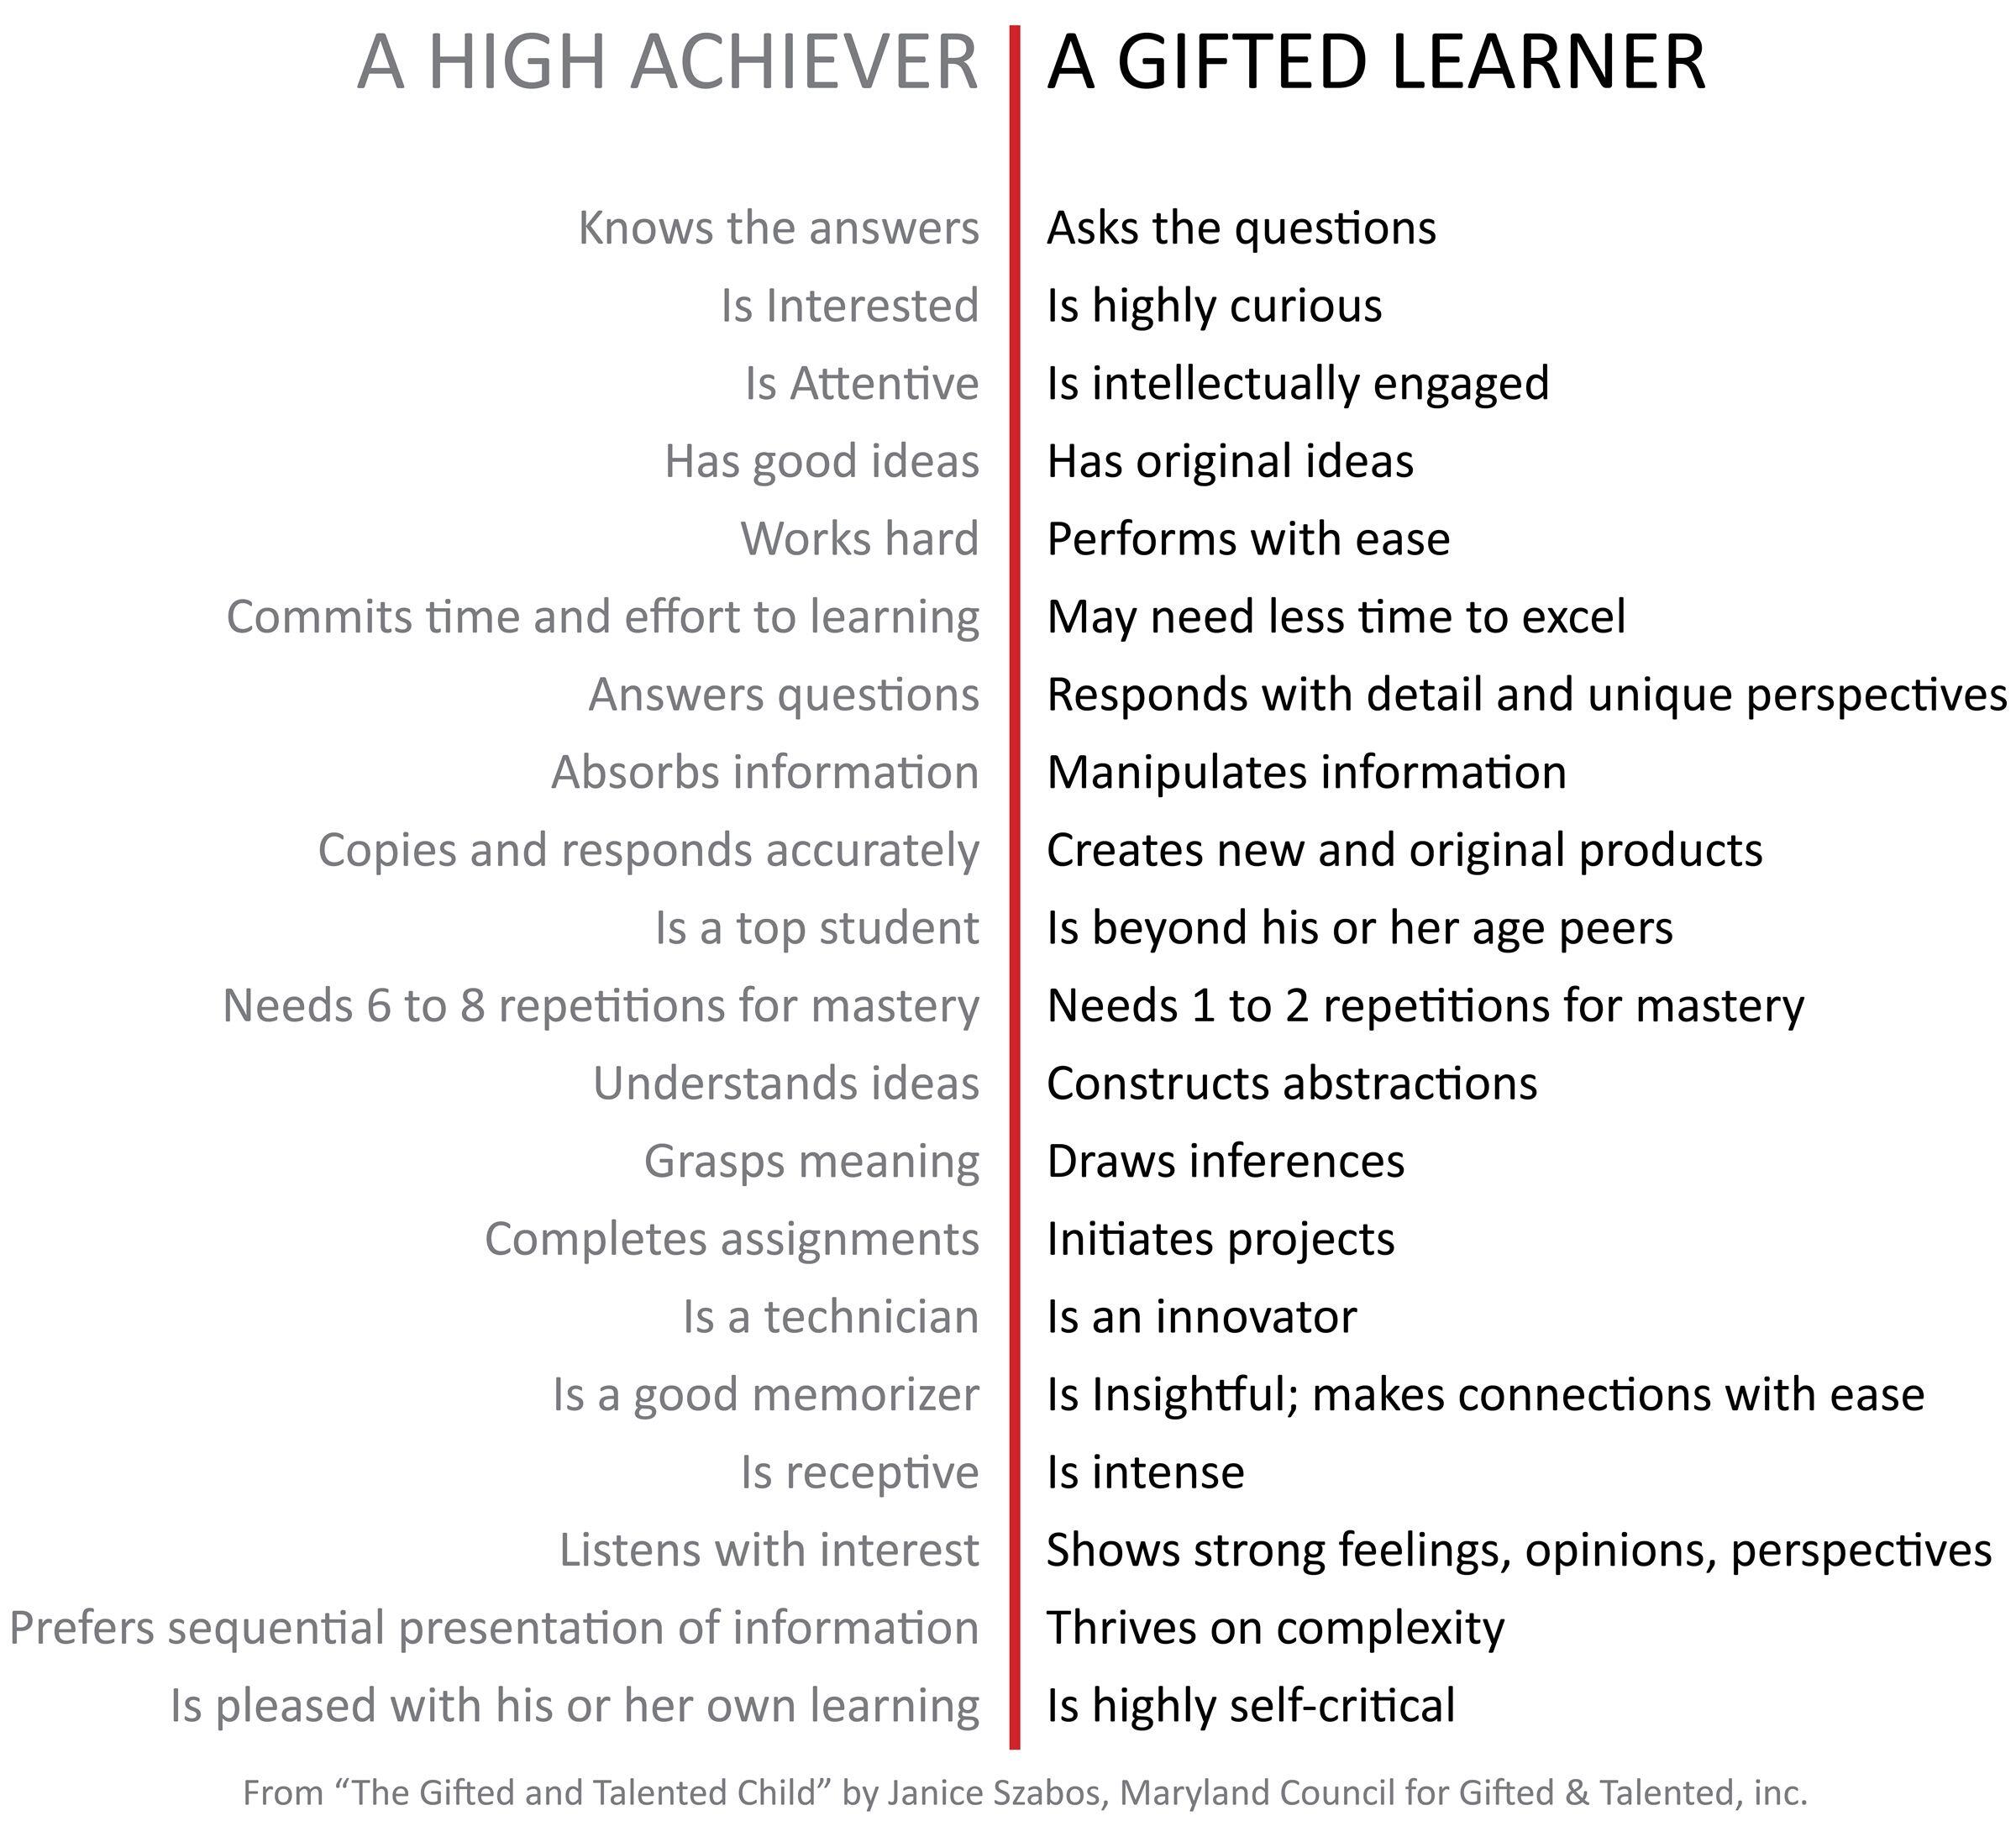 HIGH ACHIEVER OR GIFTED LEARNER